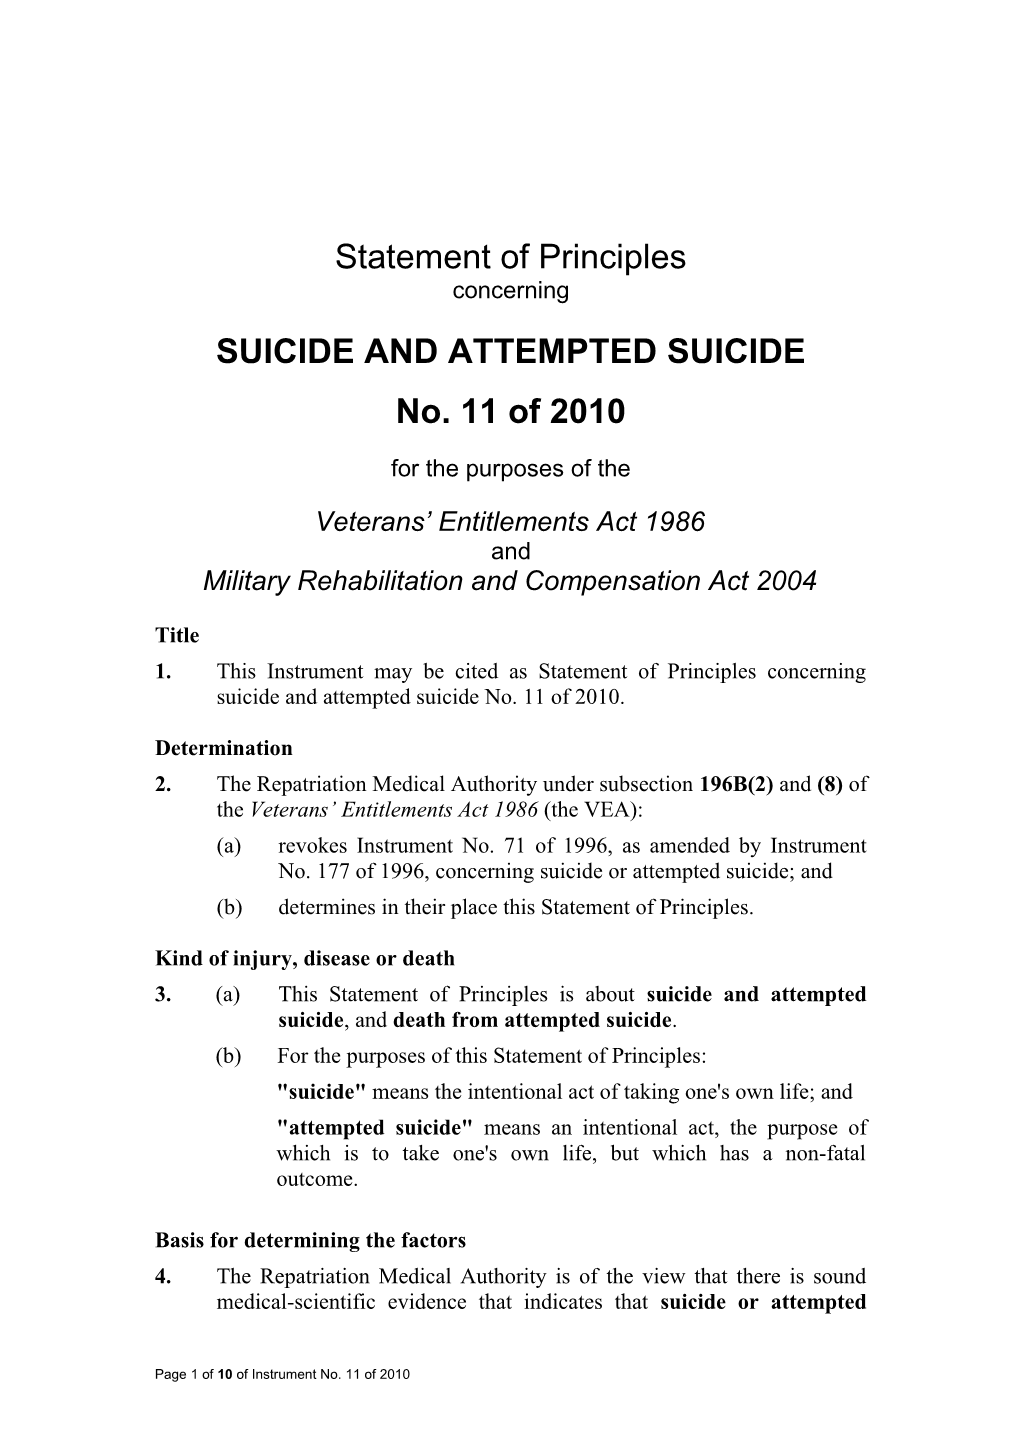 Suicide and Attempted Suicide